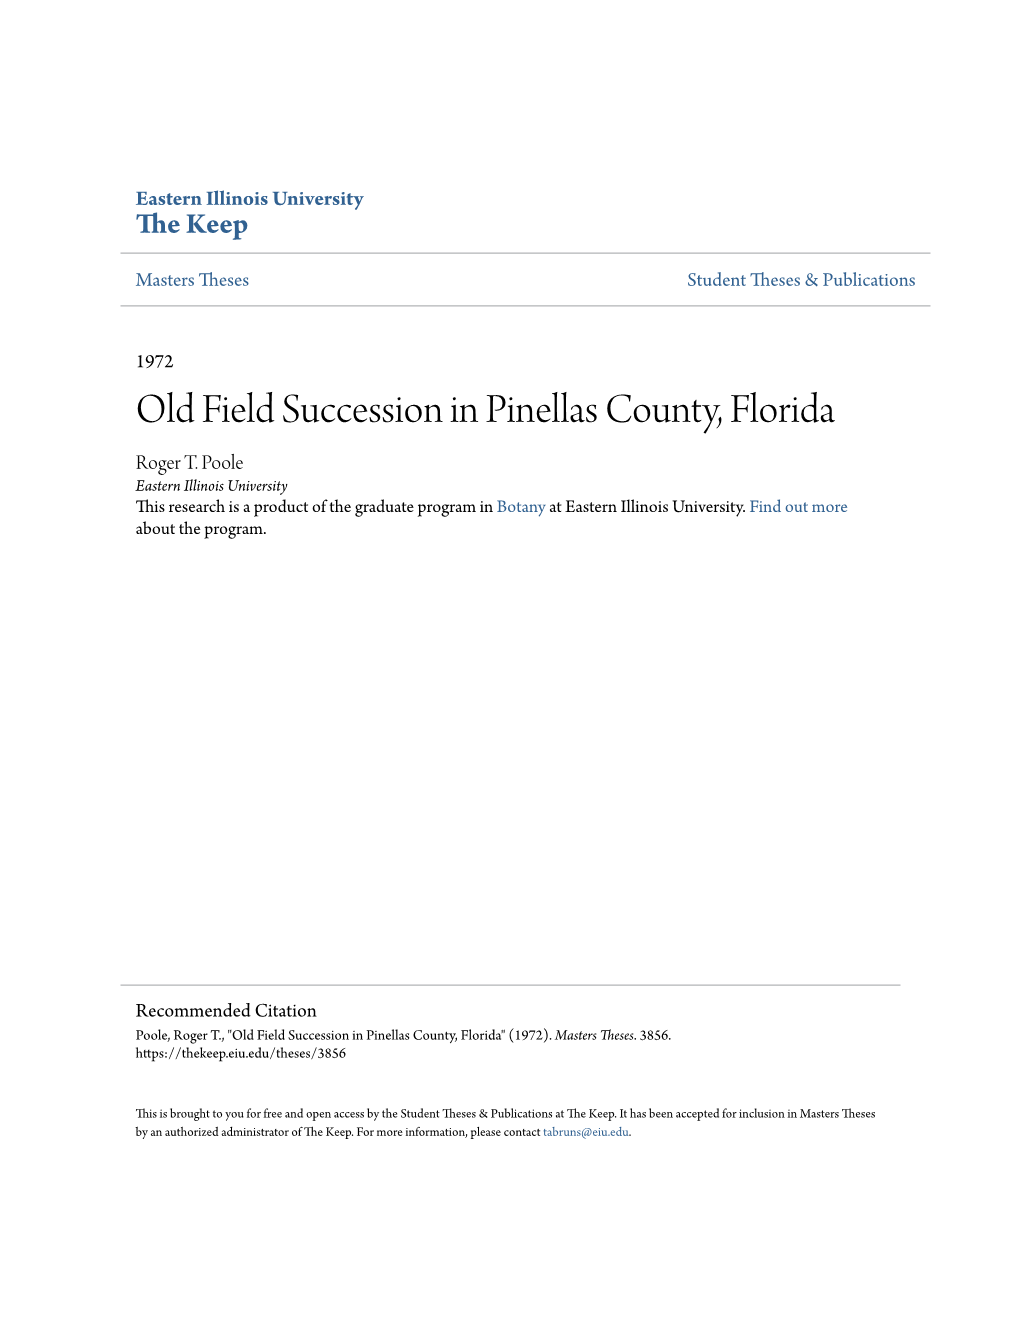 Old Field Succession in Pinellas County, Florida Roger T